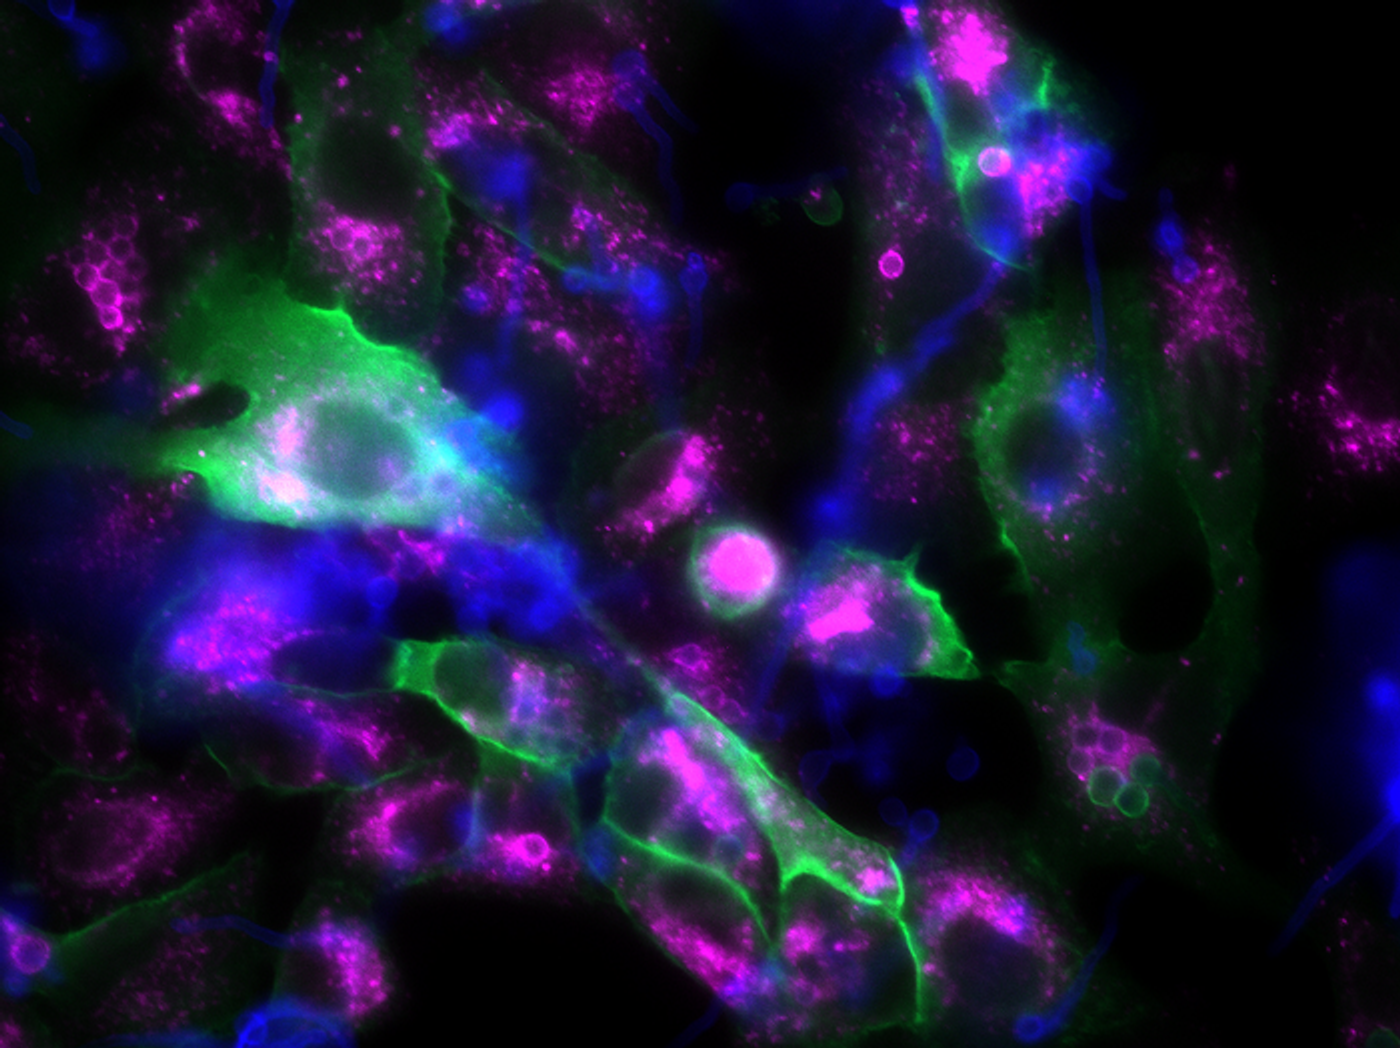 Epithelial cells (large, irregular structures) and fungal spores (small, spherical structures) seen in fluorescence. Fungal spores surrounded by p11 appear green, while mature phagosomes are marked in violet / Image credit: Leijie Jia/Leibniz-HKI